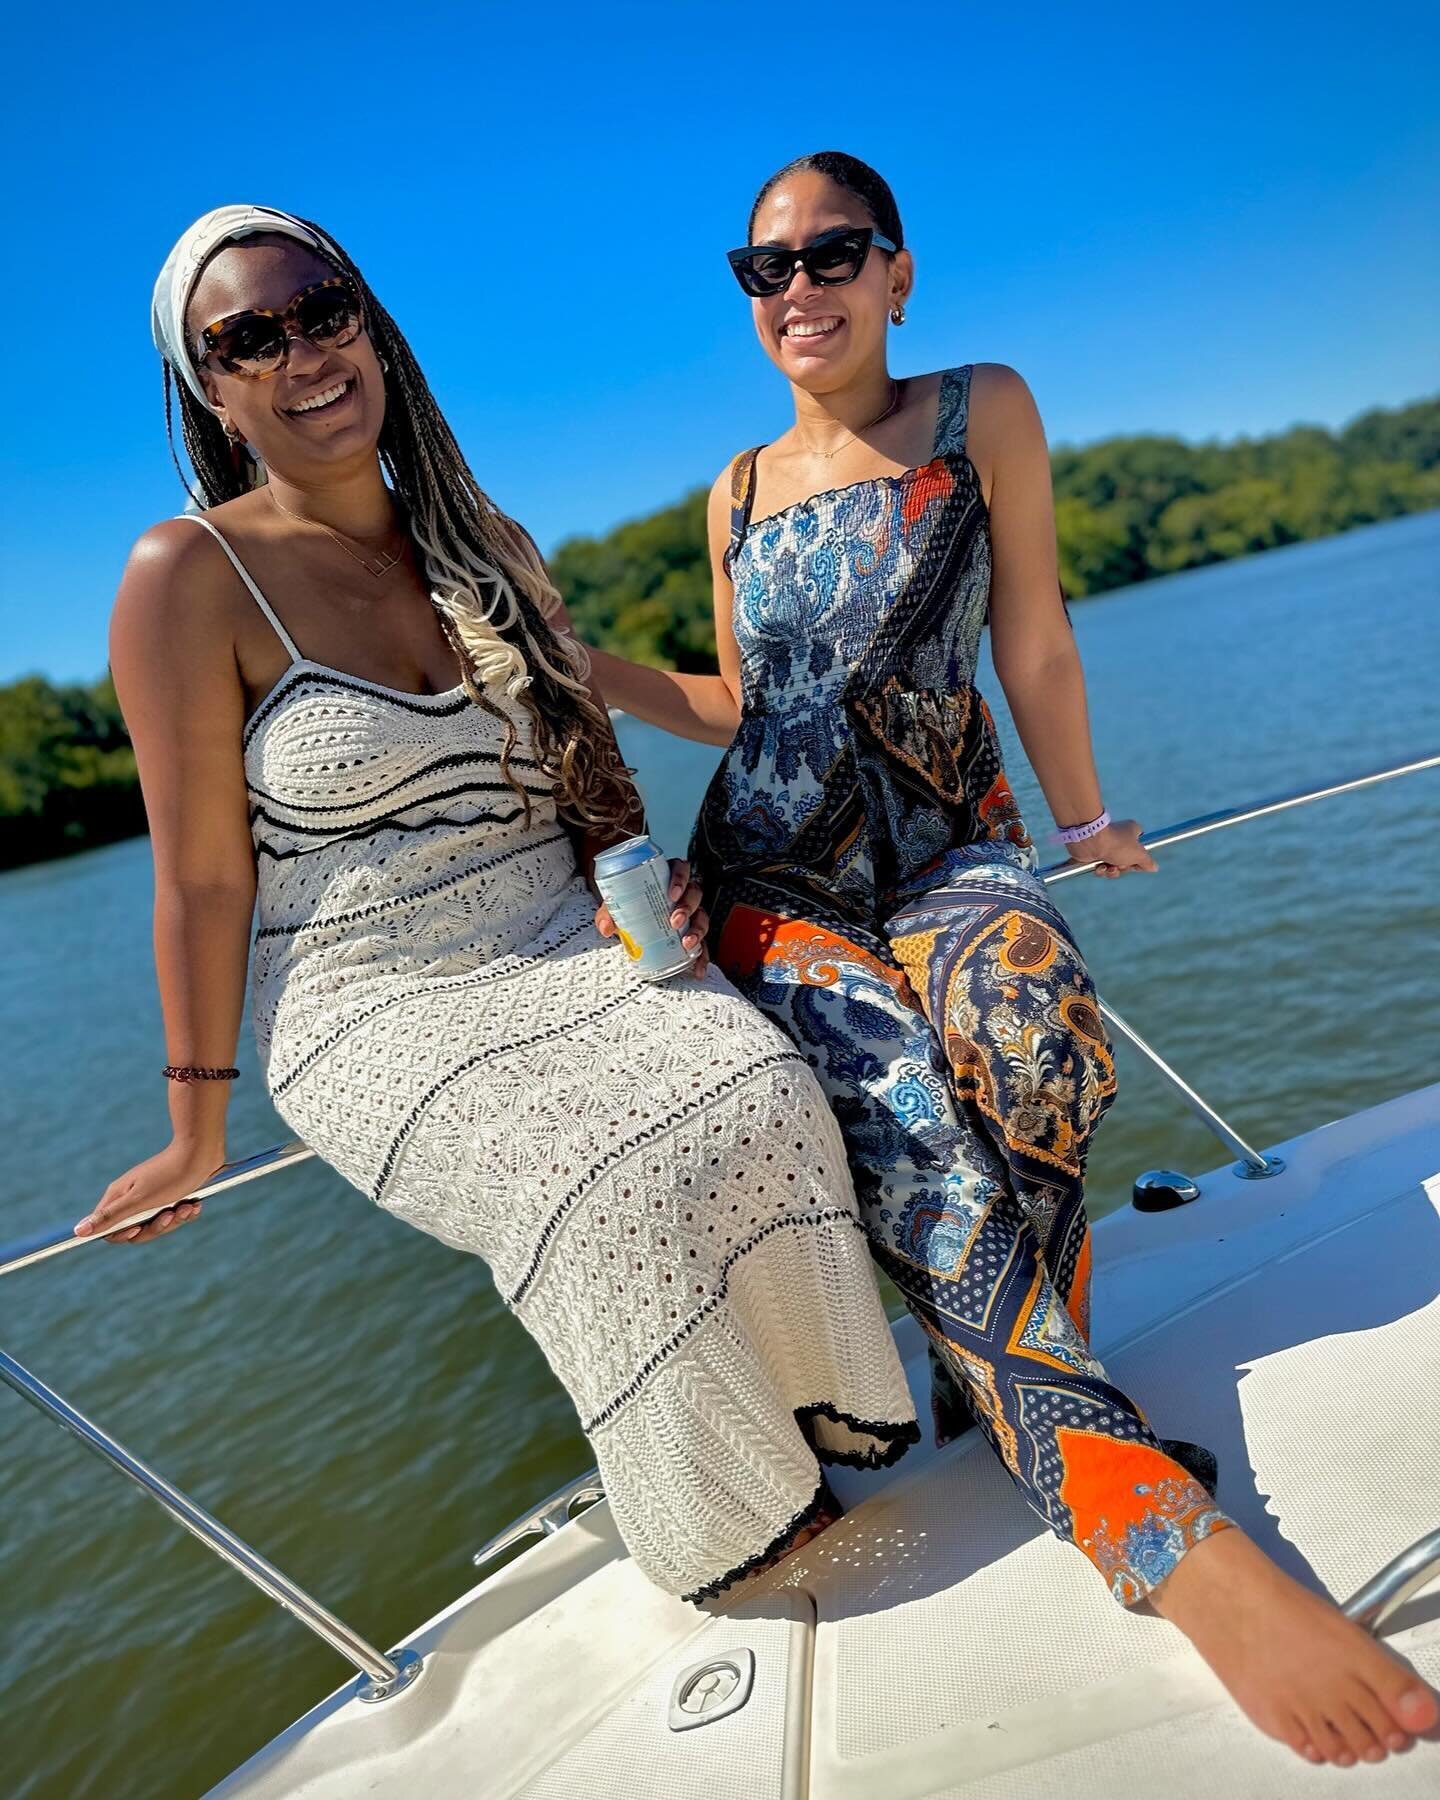 Flashback Friday!!!⚓️☀️

We&rsquo;re less than 30 days away from Boat Season! Pick a date, grab your crew, and let&rsquo;s Party on the Potomac!!

Now offering 20% off any Half Day Charters booked today through March 22nd! Click the link in the bio t